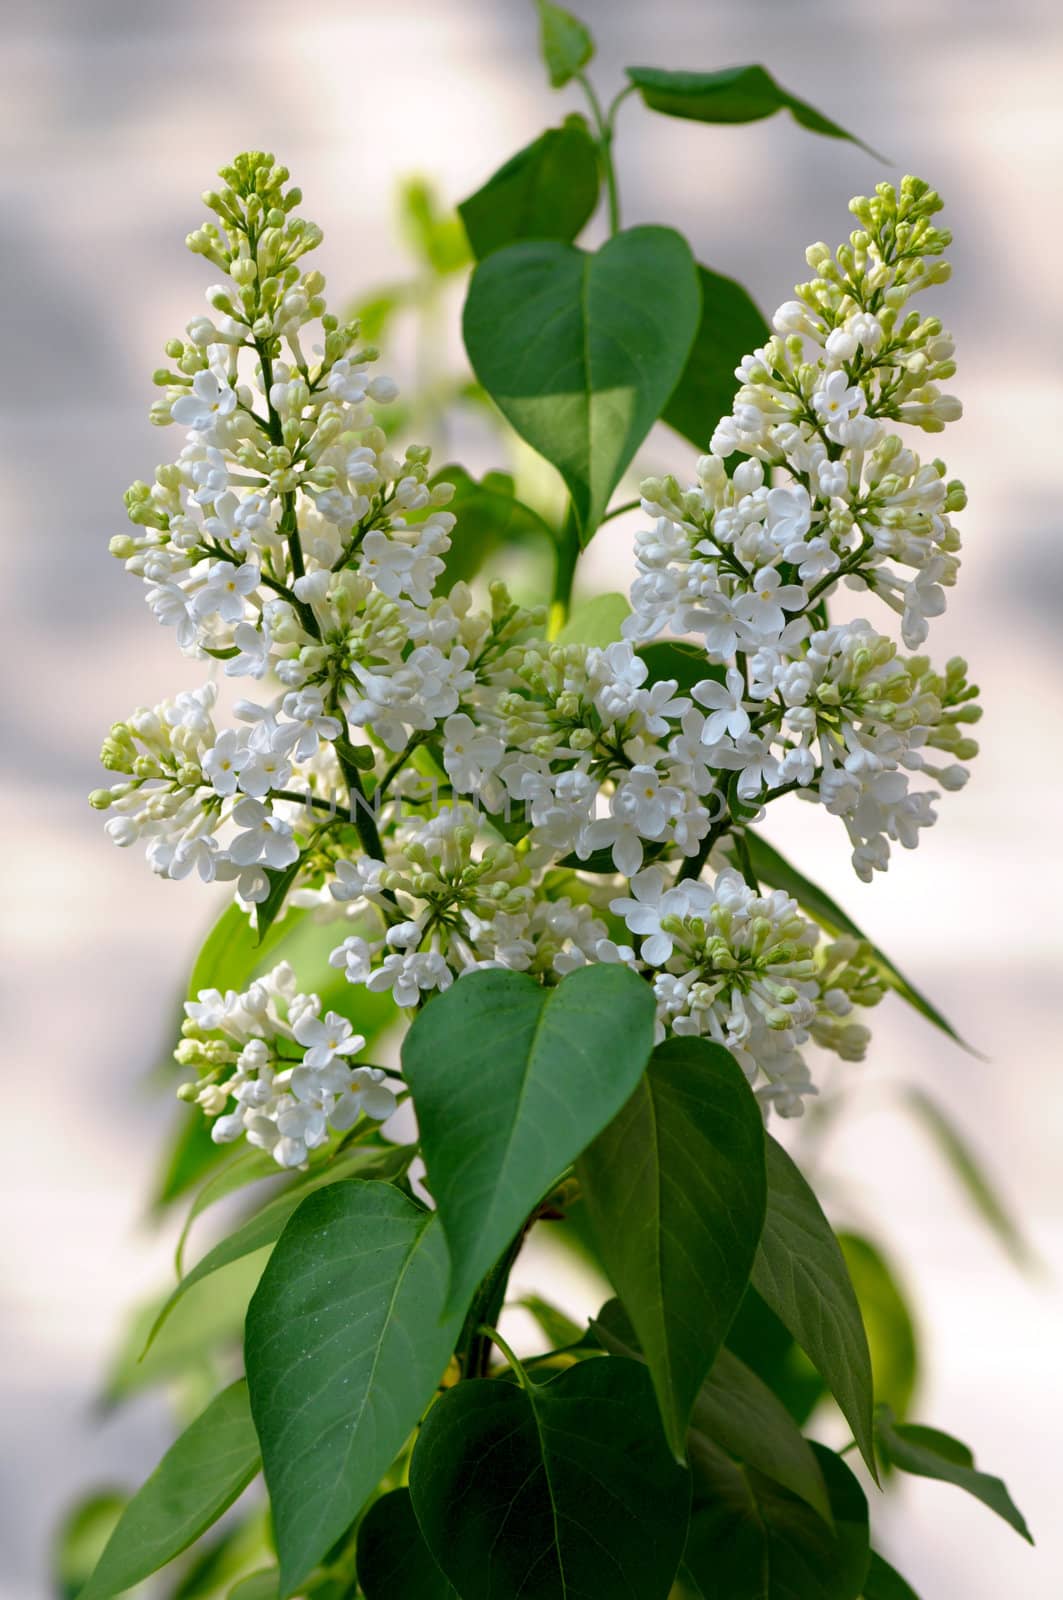 White lilac bushes in the garden